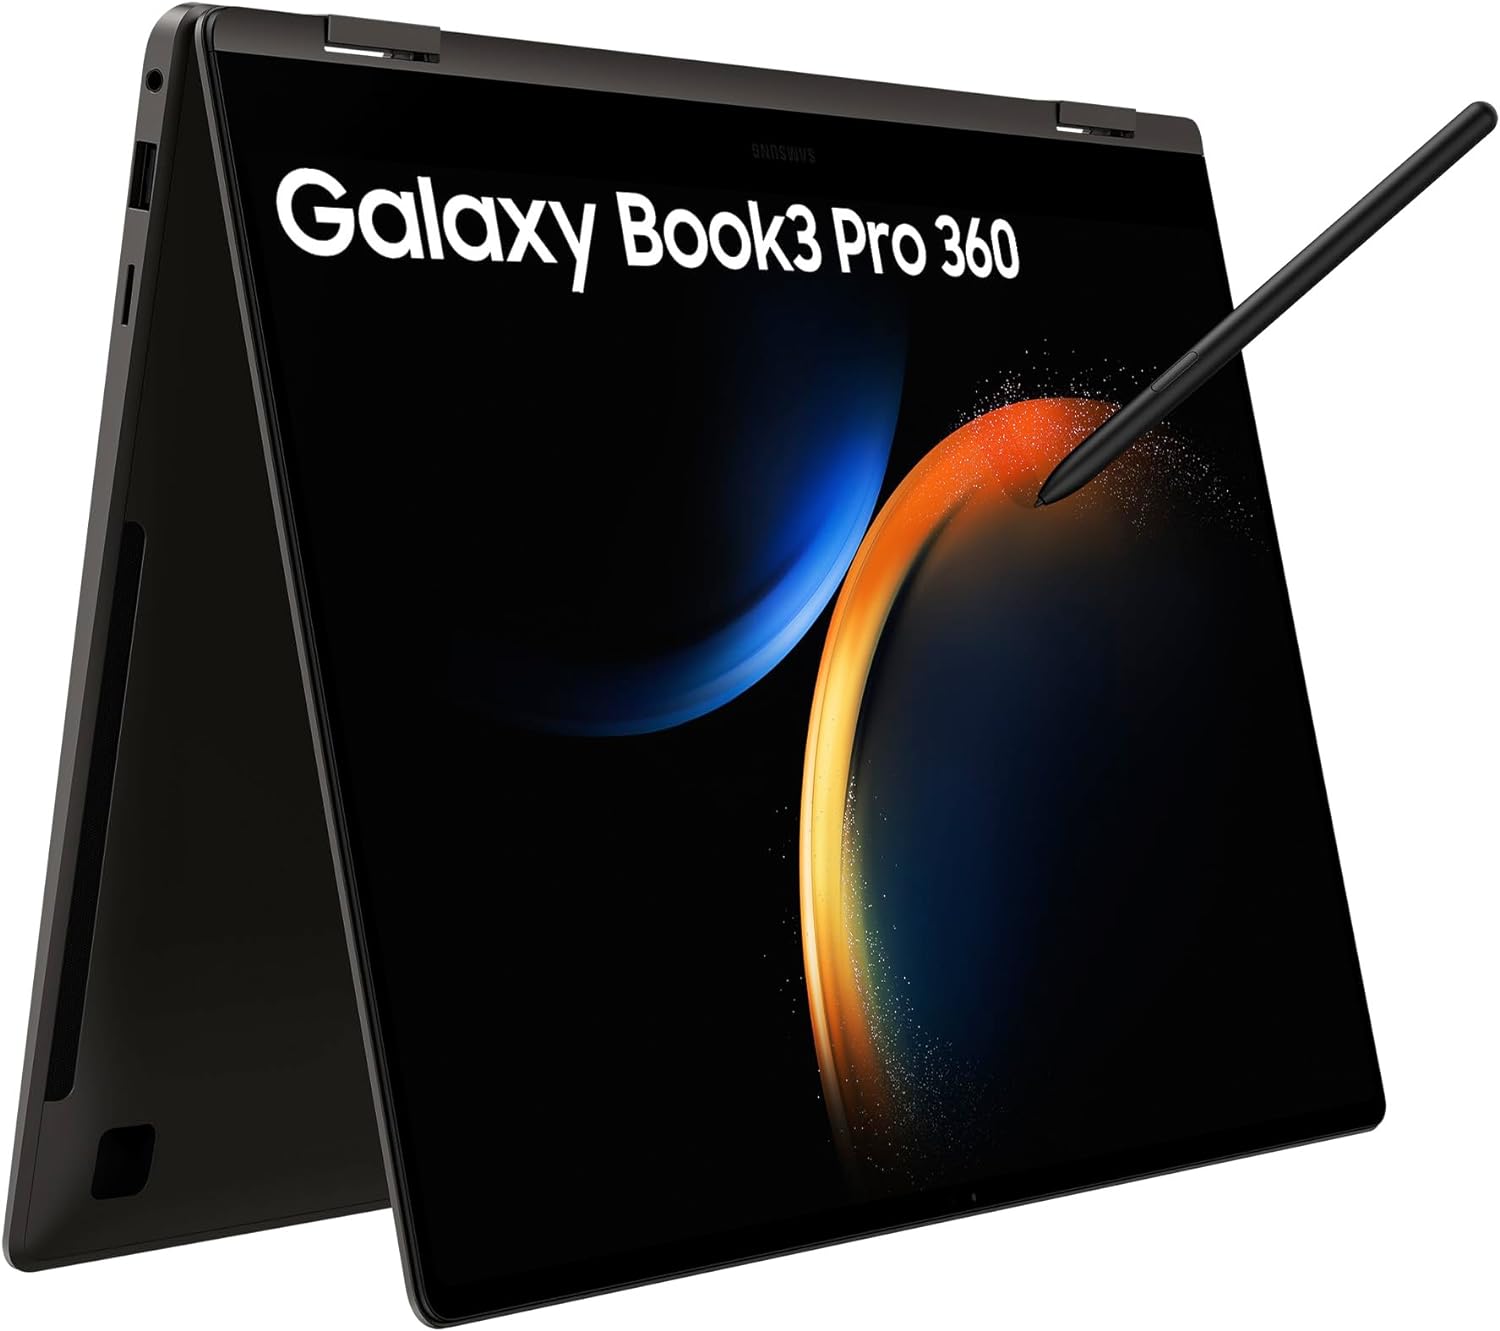 Samsung Galaxy Book3 Pro 360 Wi - Fi Laptop, 16 Inch, 13th gen Intel Core i5 Processor, 8GB RAM, 256GB Storage, Graphite - Official   Import  Single ASIN  Import  Multiple ASIN ×Product customization General Description Gallery Reviews - Amazing Gadgets Outlet